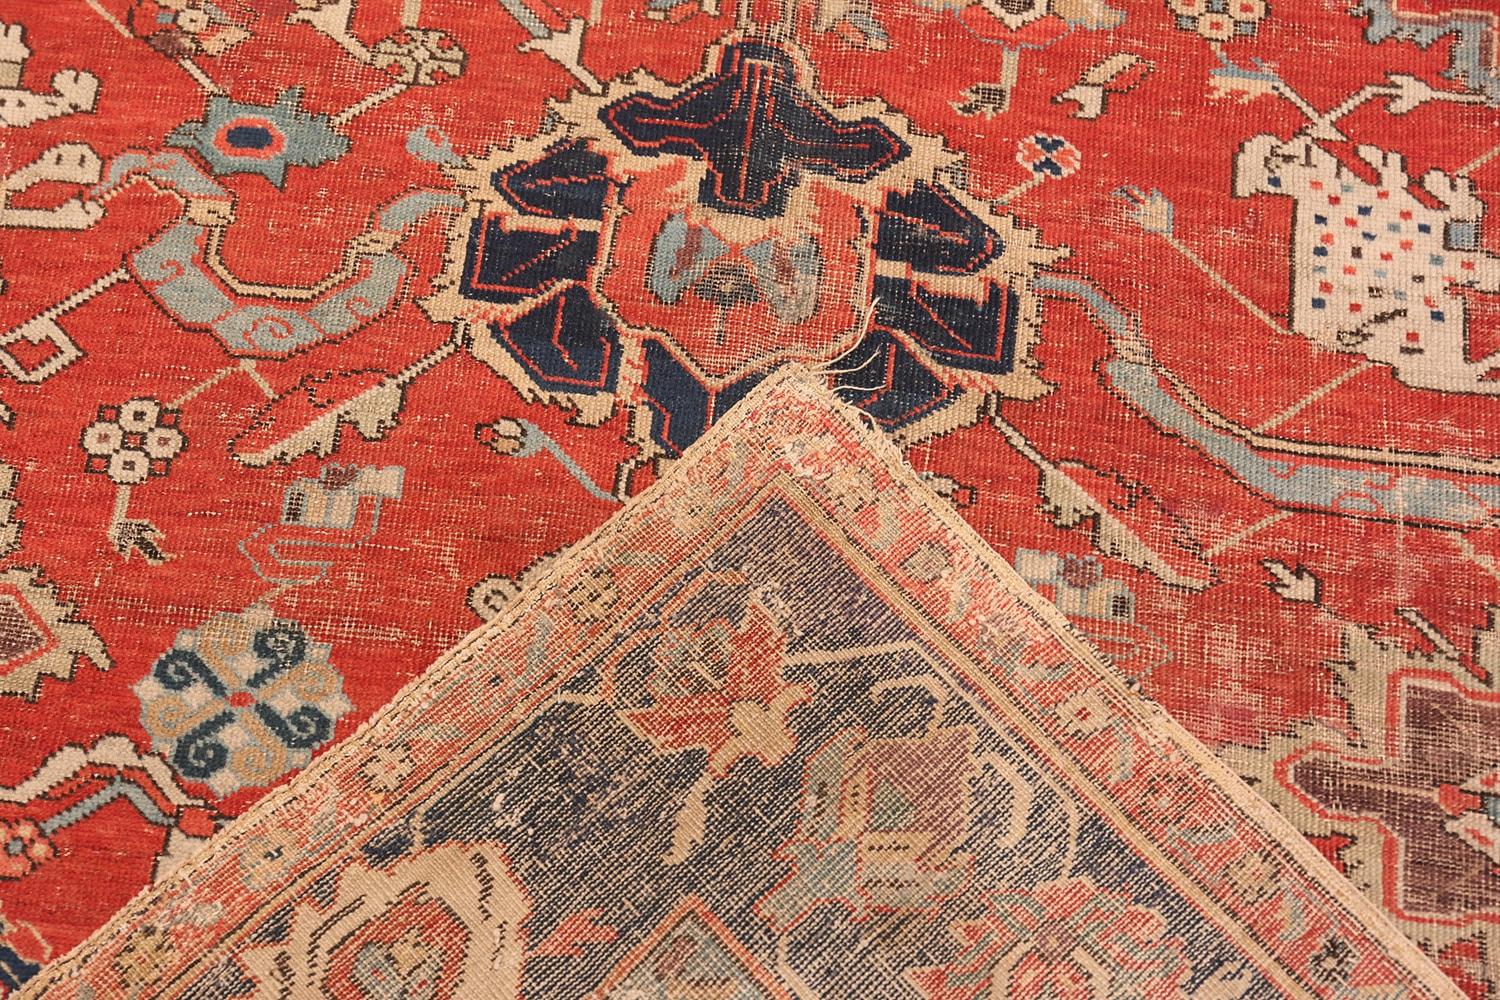 Beautiful red antique 17th century northwest Persian animal rug, country of origin: Persia, date: circa 17th century. Size: 6 ft 10 in x 14 ft (2.08 m x 4.27 m). 

